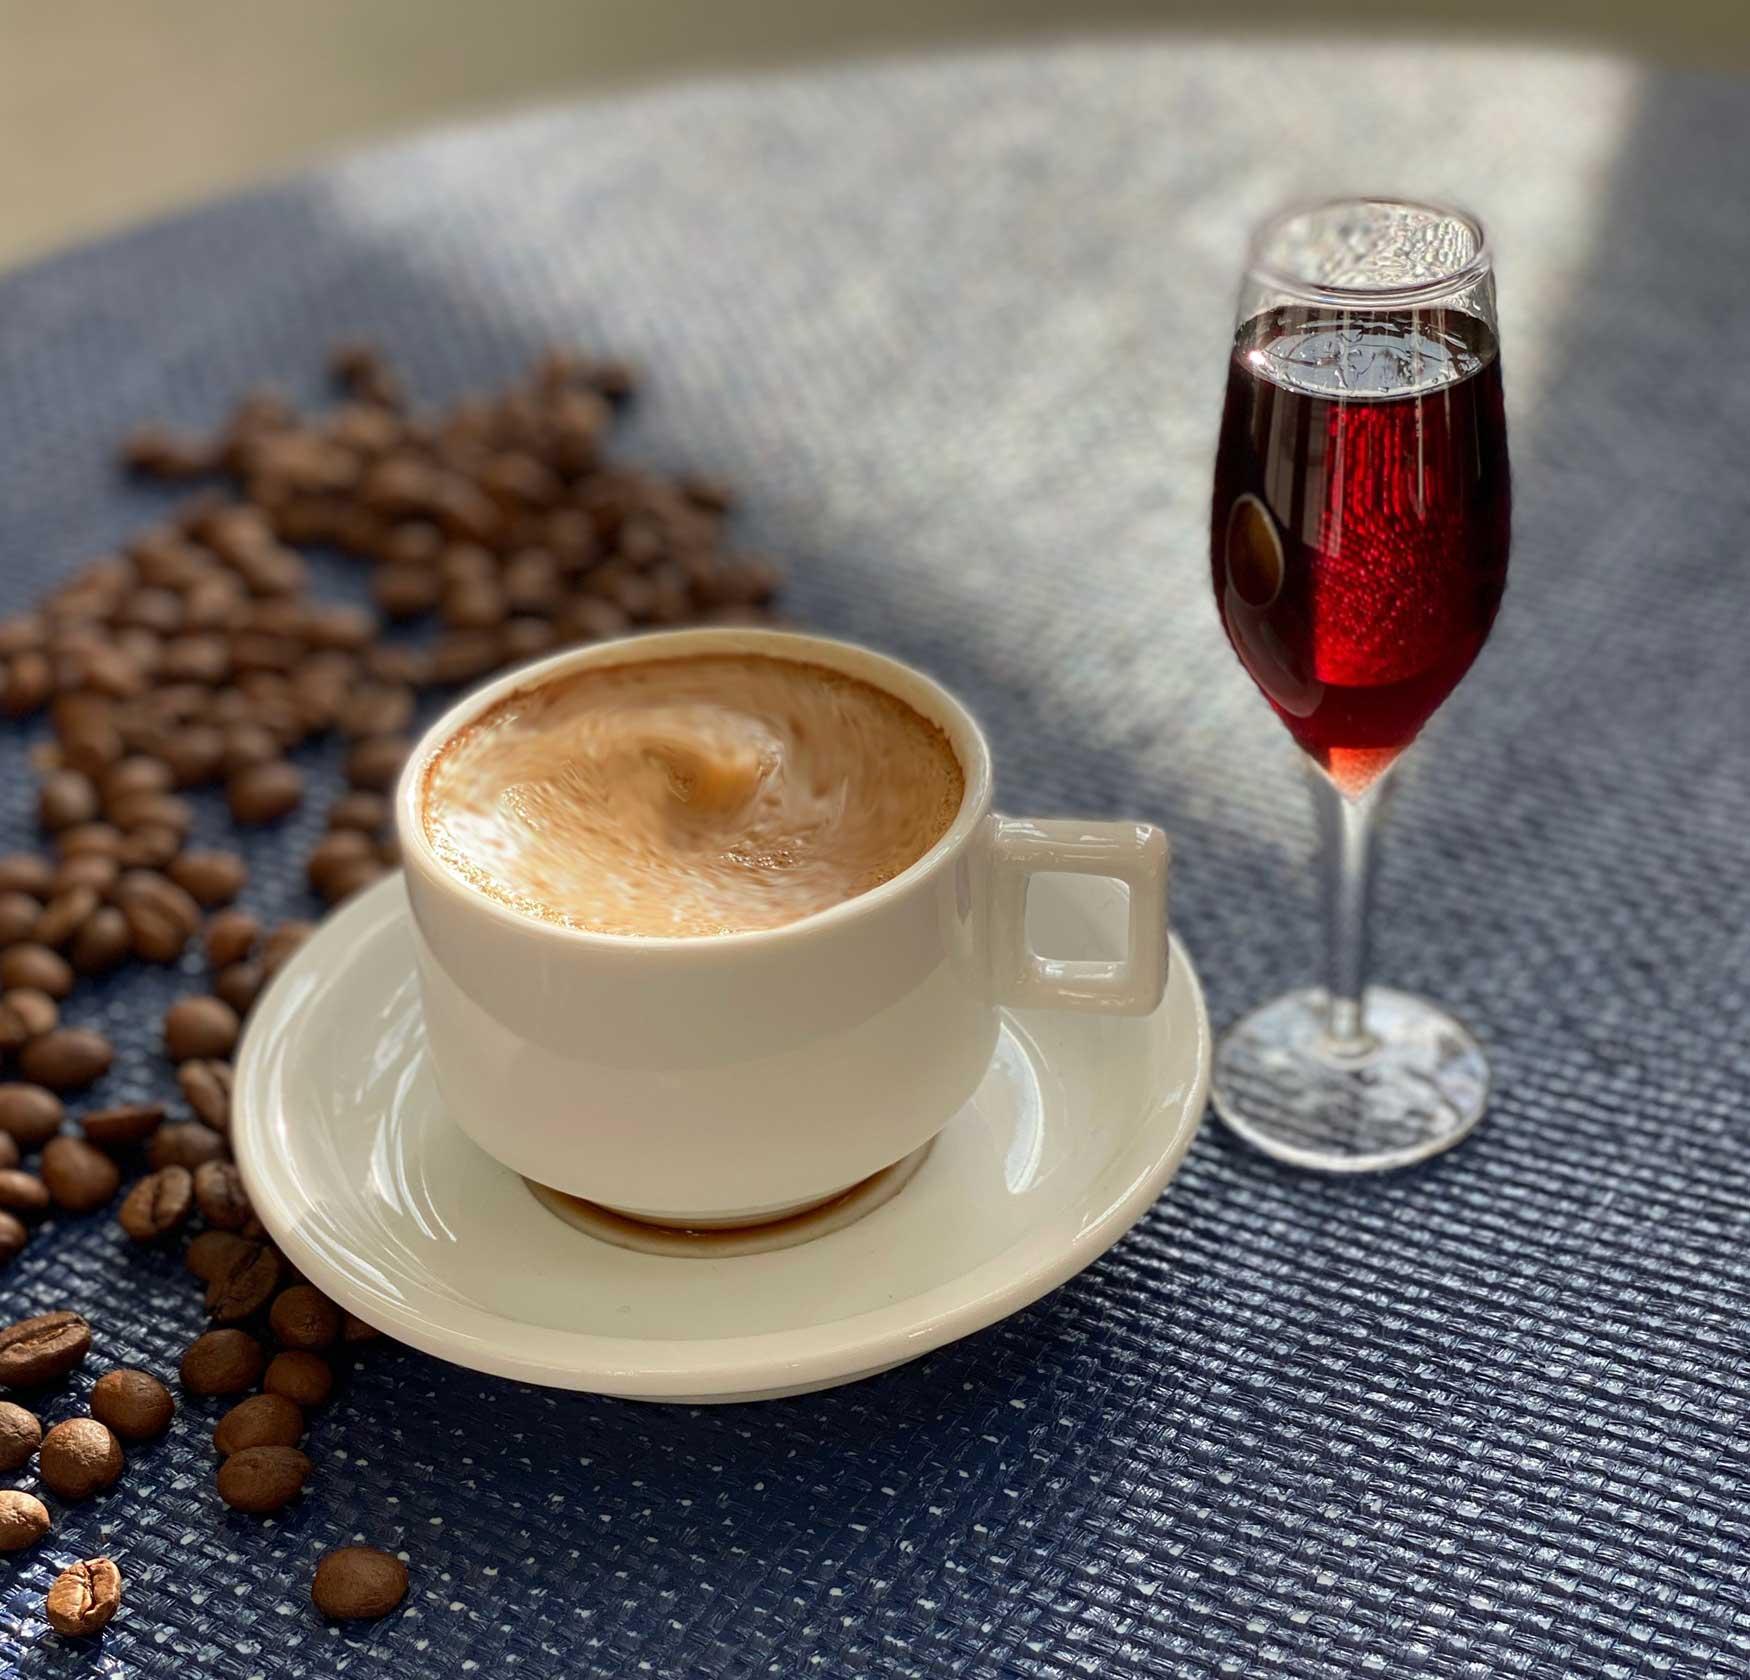 An example of the Cascara, the mixed drink (drink) featuring Rothman & Winter Orchard Cherry Liqueur and espresso coffee; photo by Lauren Clark